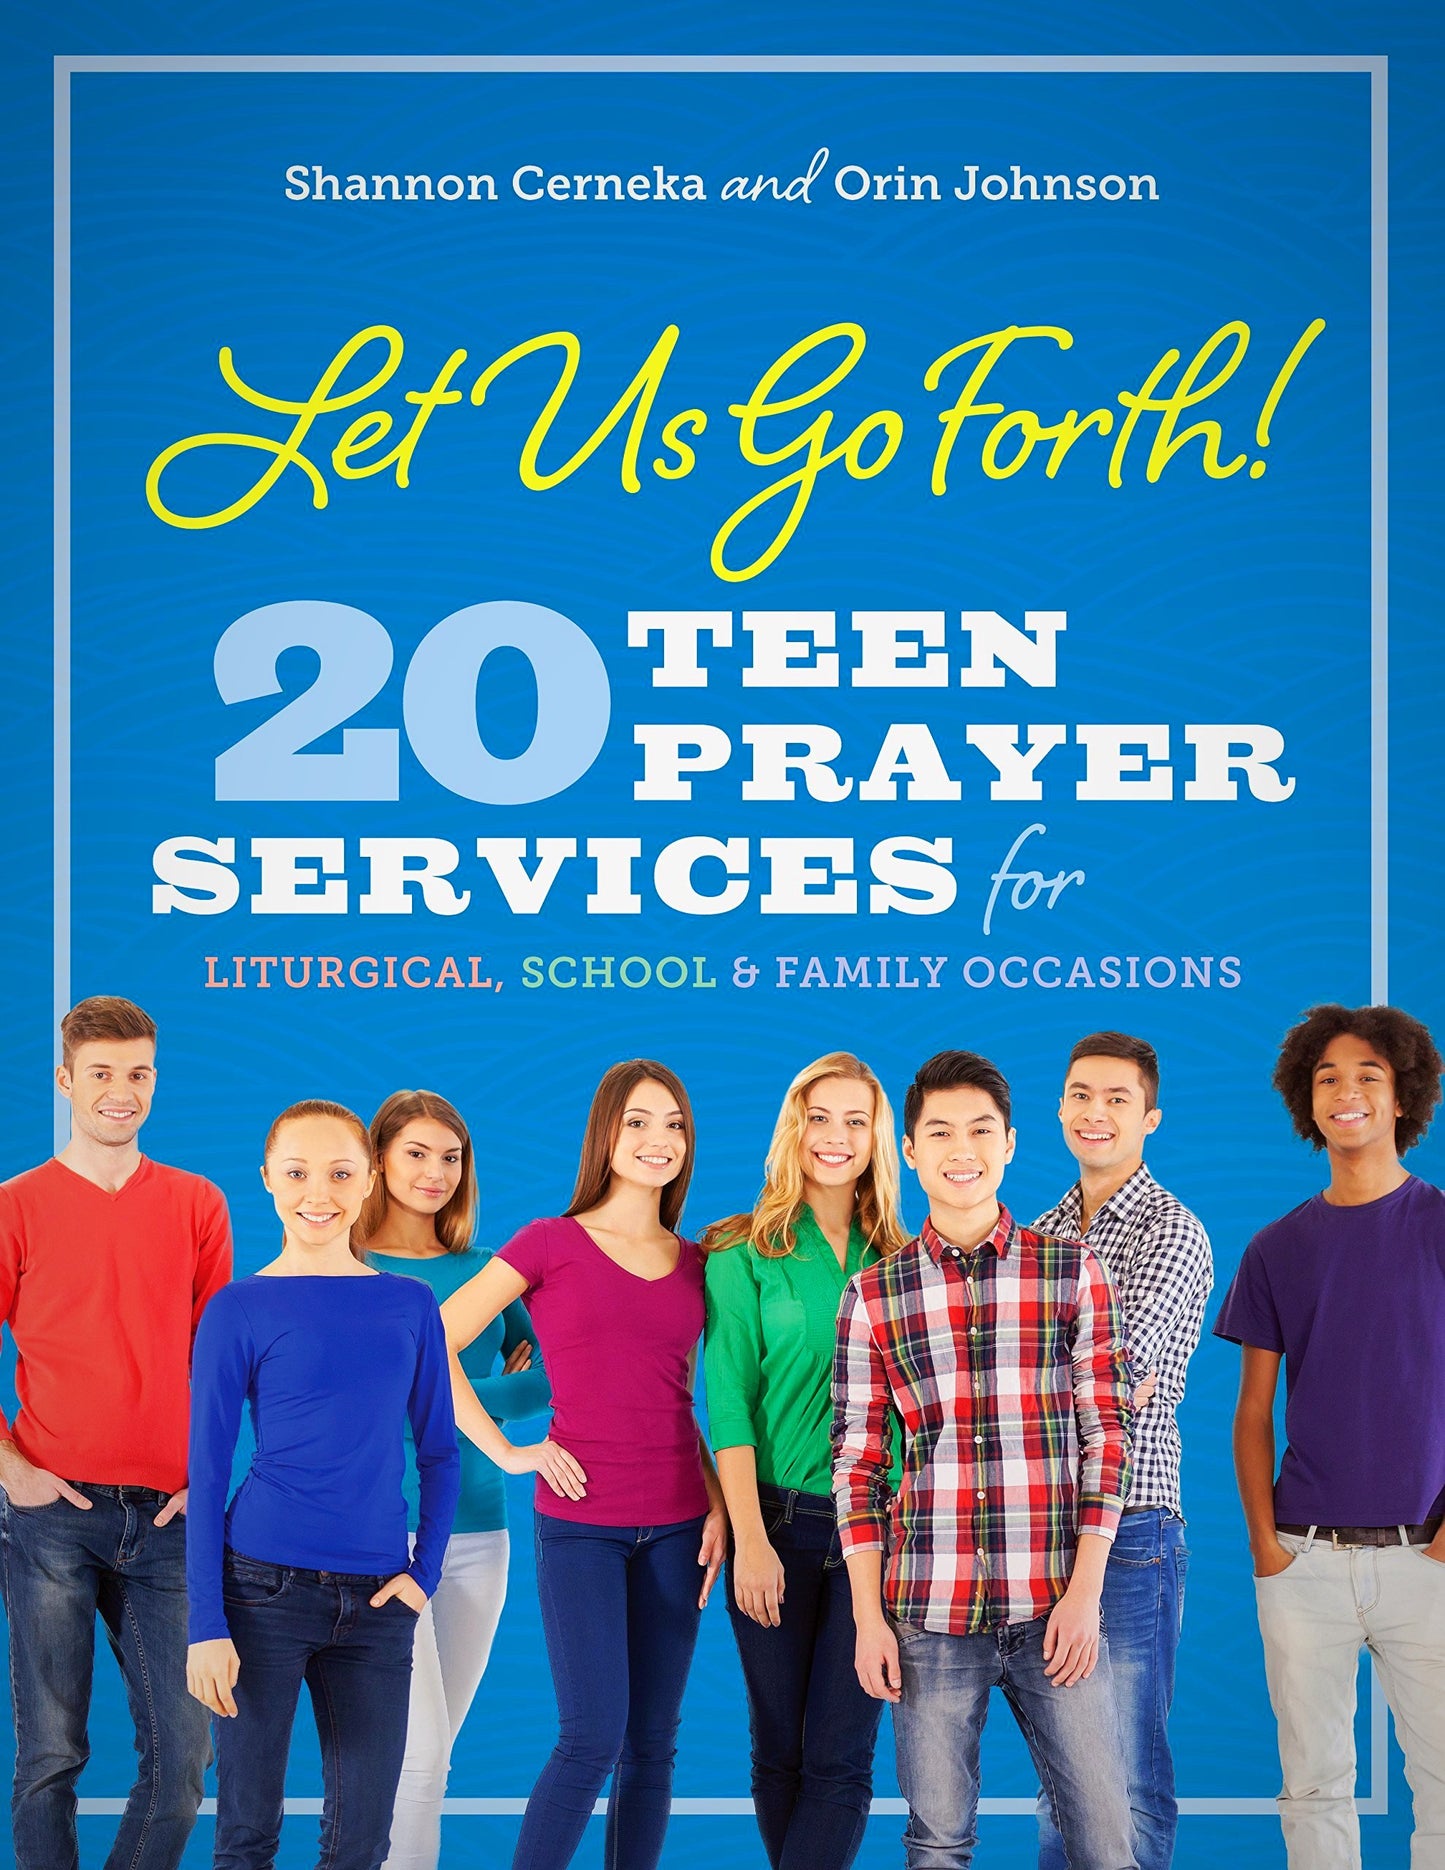 Let Us Go forth 20 Teen Prayer Services For Liturgical, Schoo & Family Occasions